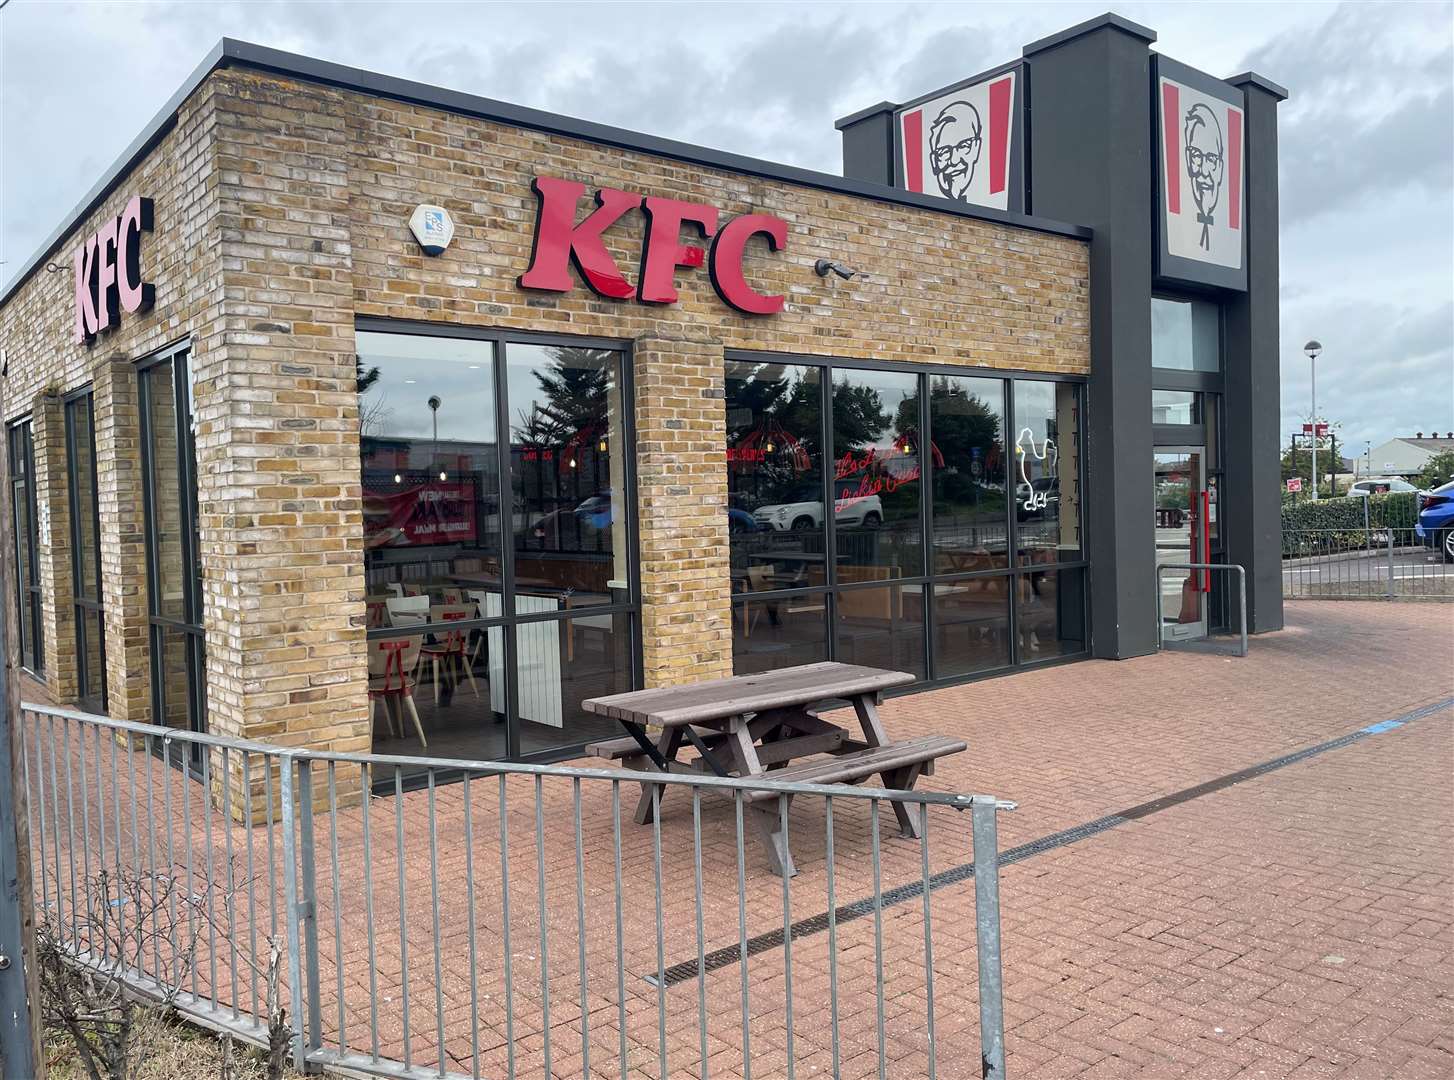 KFC in Sittingbourne has banned teenagers without an adult at peak times